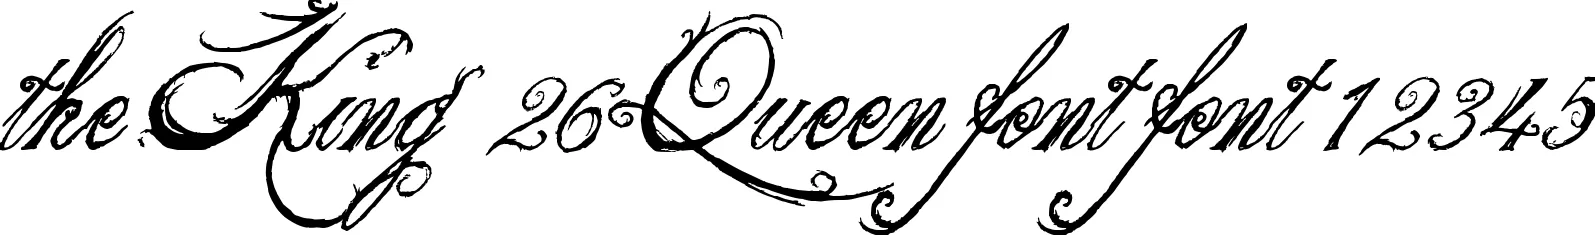 Dynamic the King  26 Queen font Font Preview https://safirsoft.com